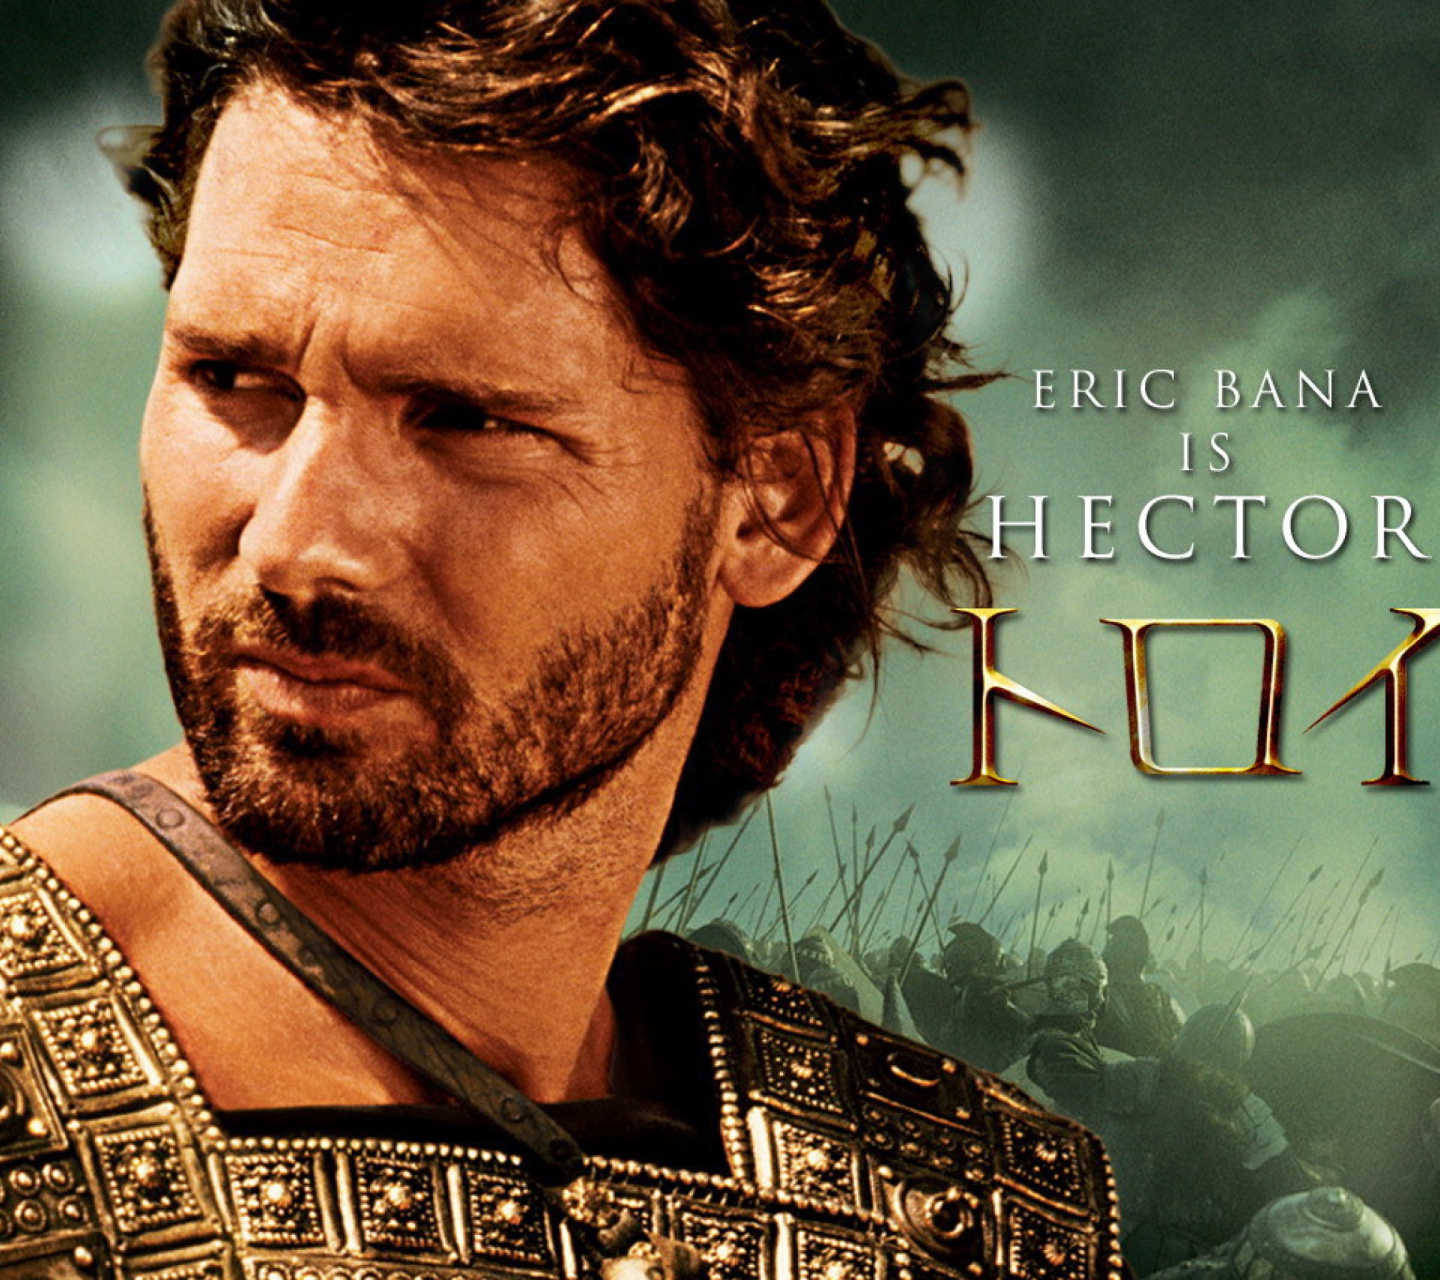 Eric Bana as Hector in Troy wallpaper 1440x1280